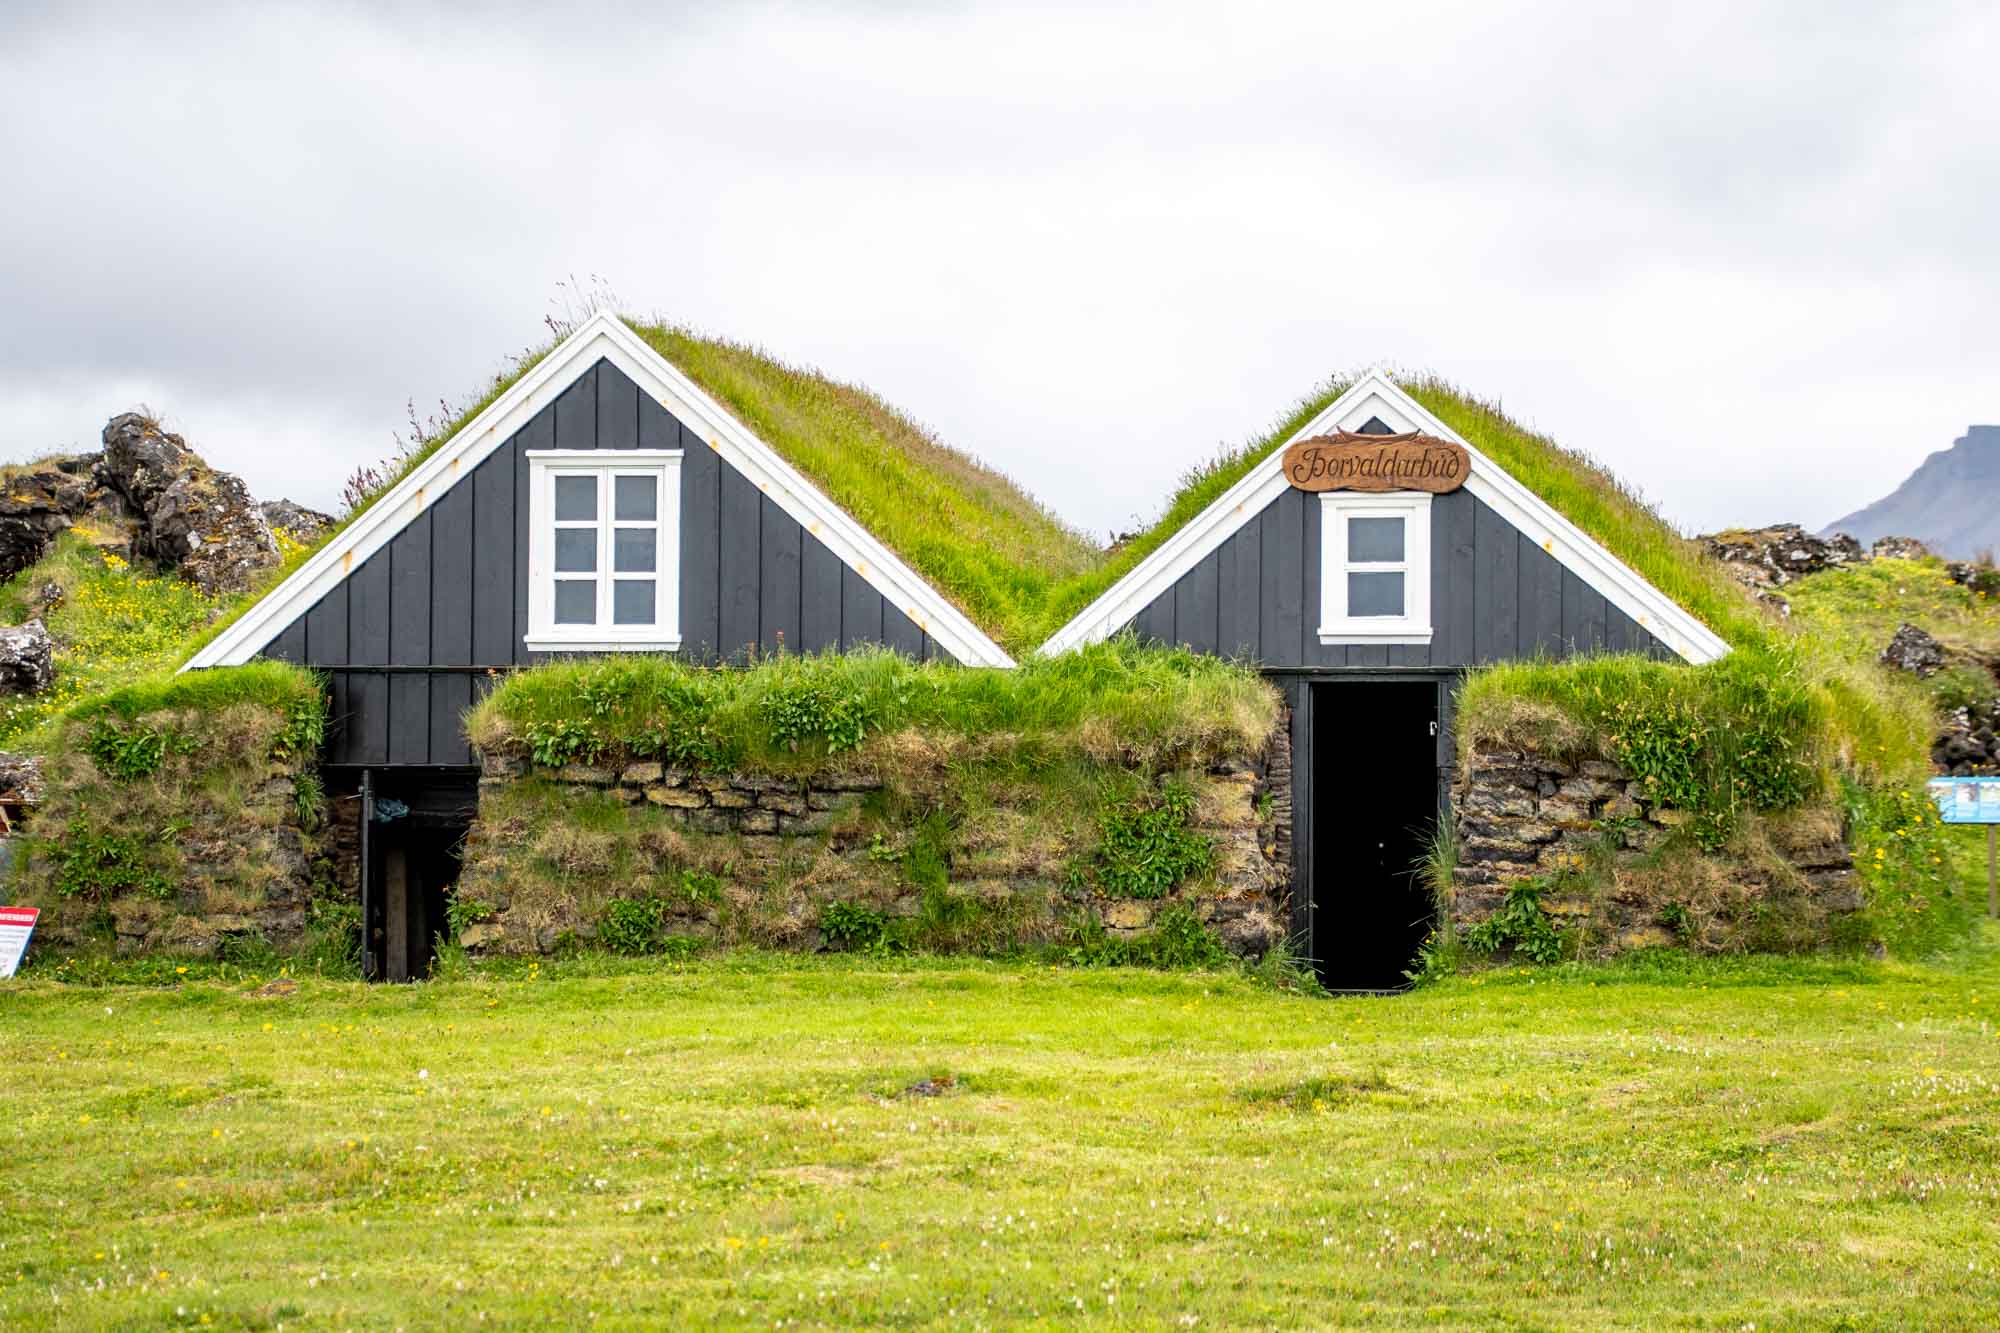 Two turf roof buildings in Iceland